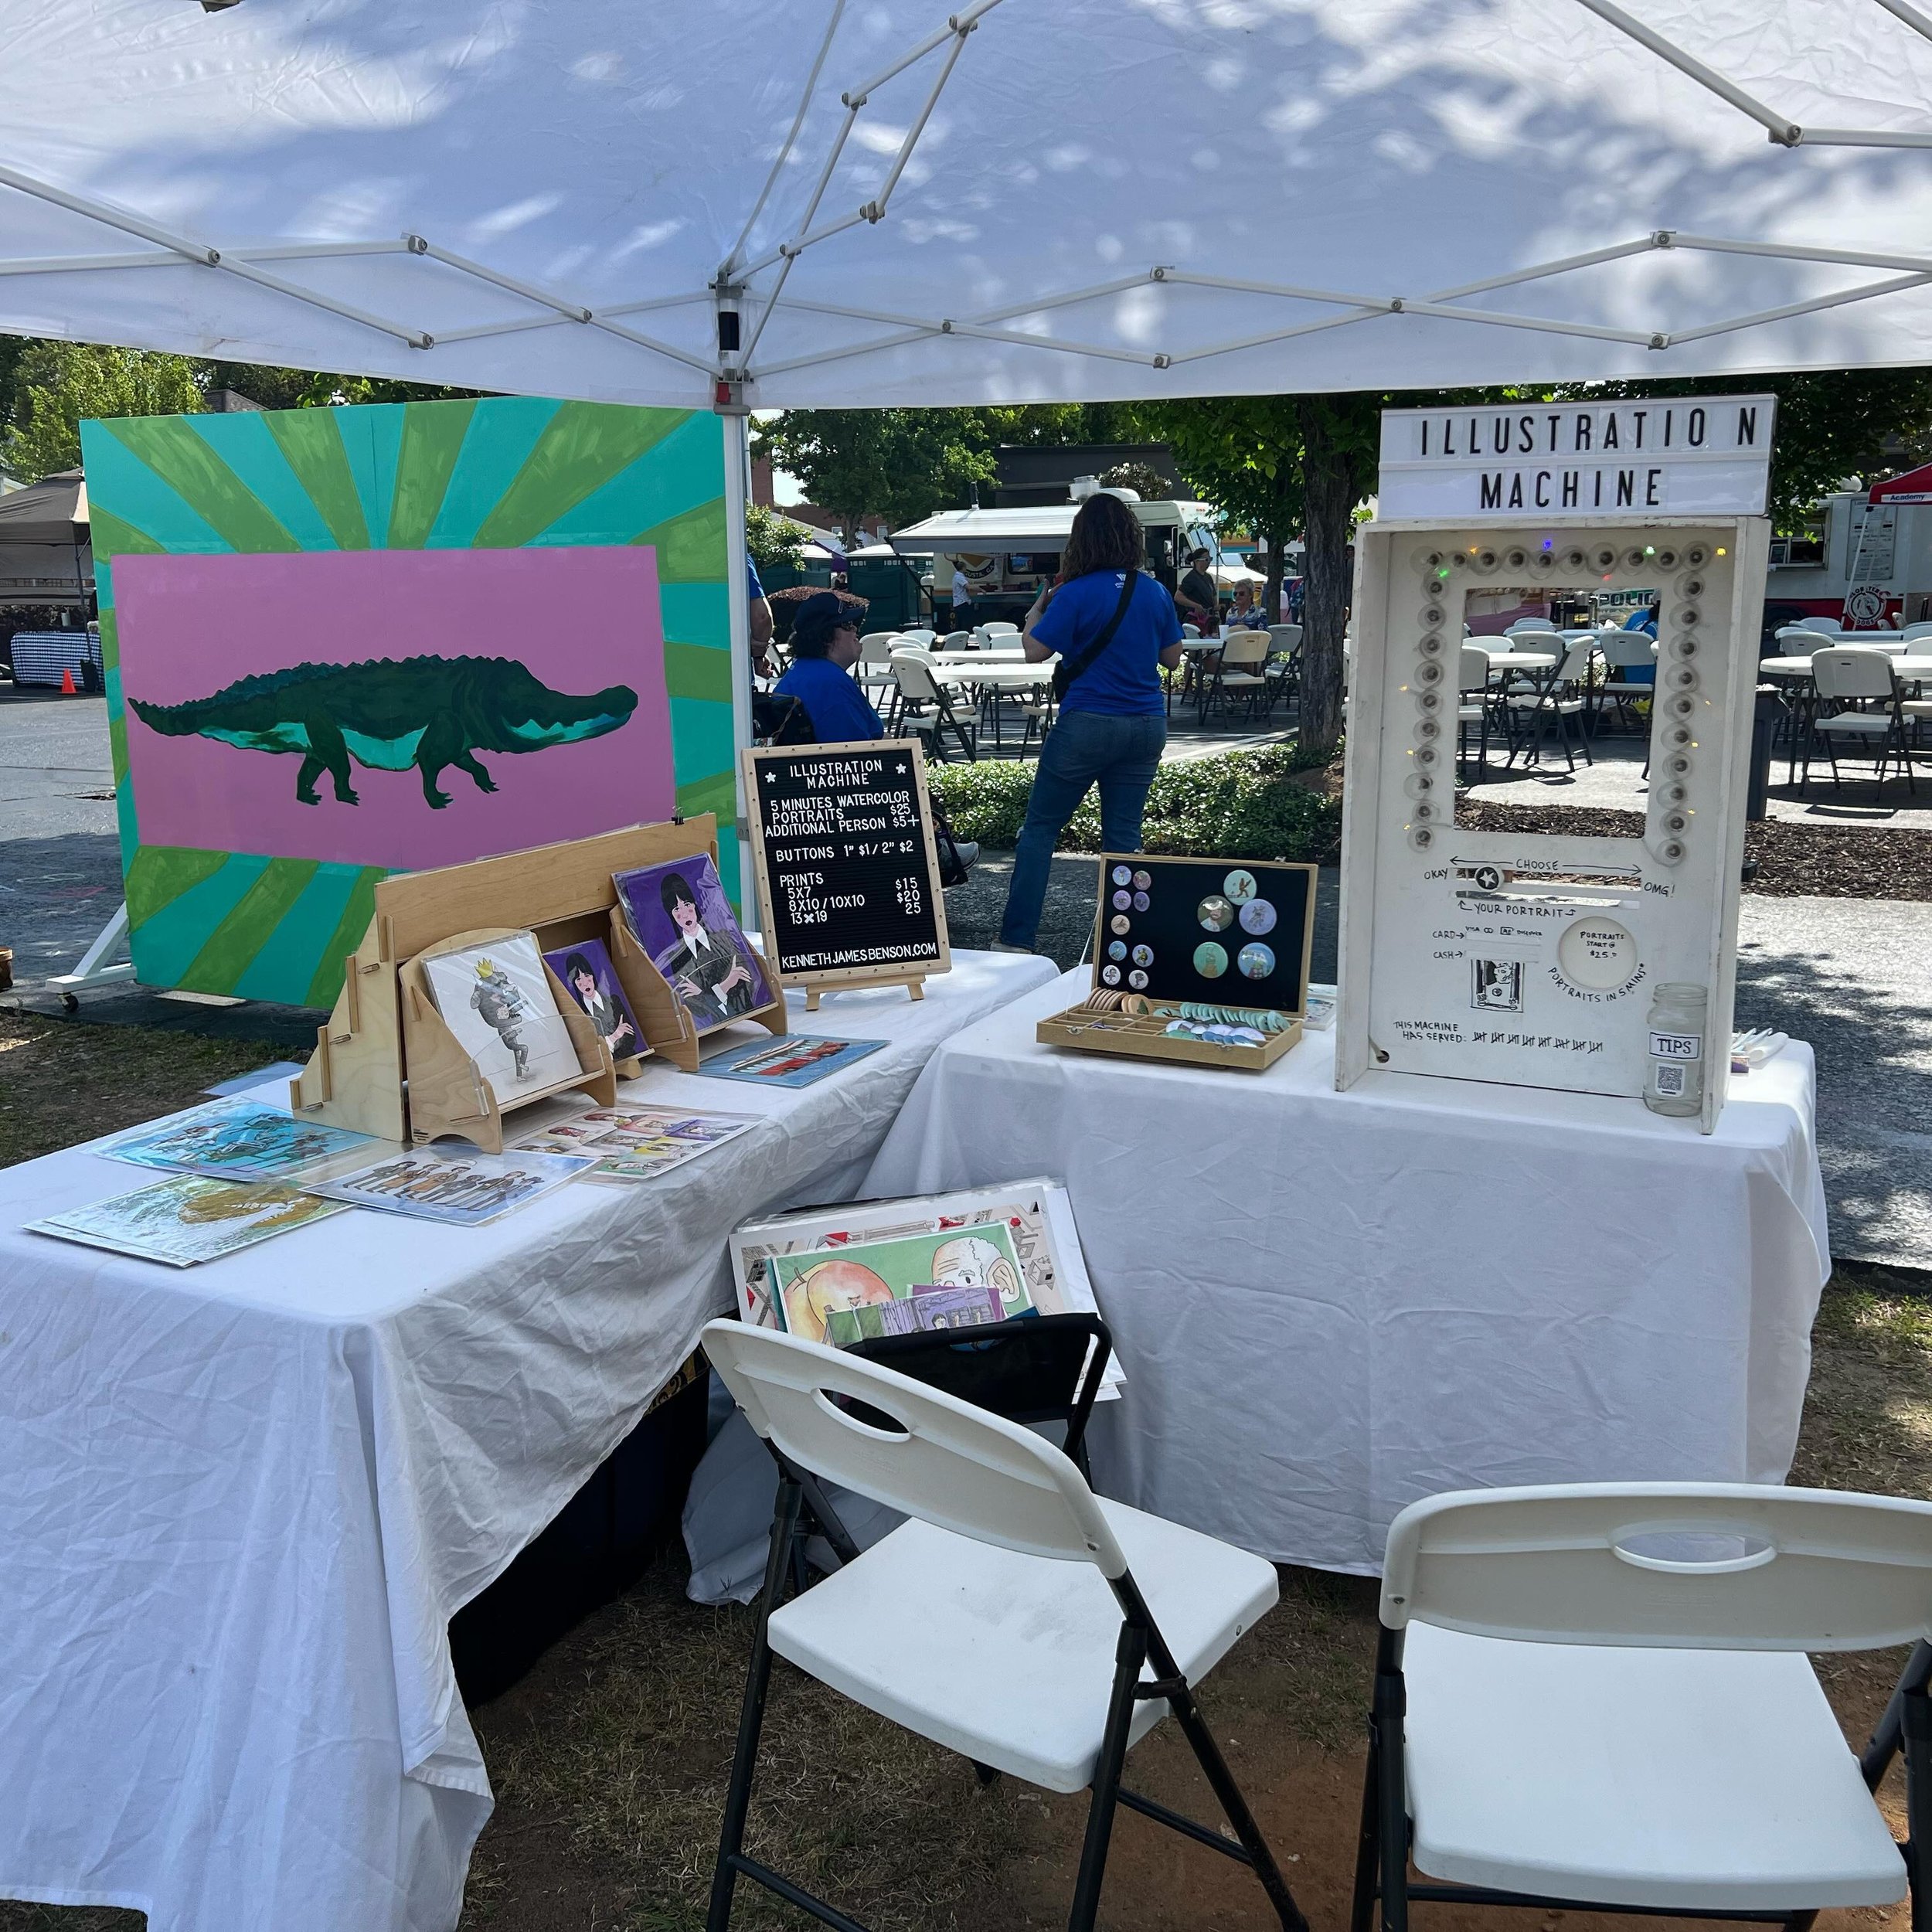 All setup at the @downtownnorthaugusta Spring Fest from 10am to 4pm today with prints, buttons and of course my Illustration Machine.